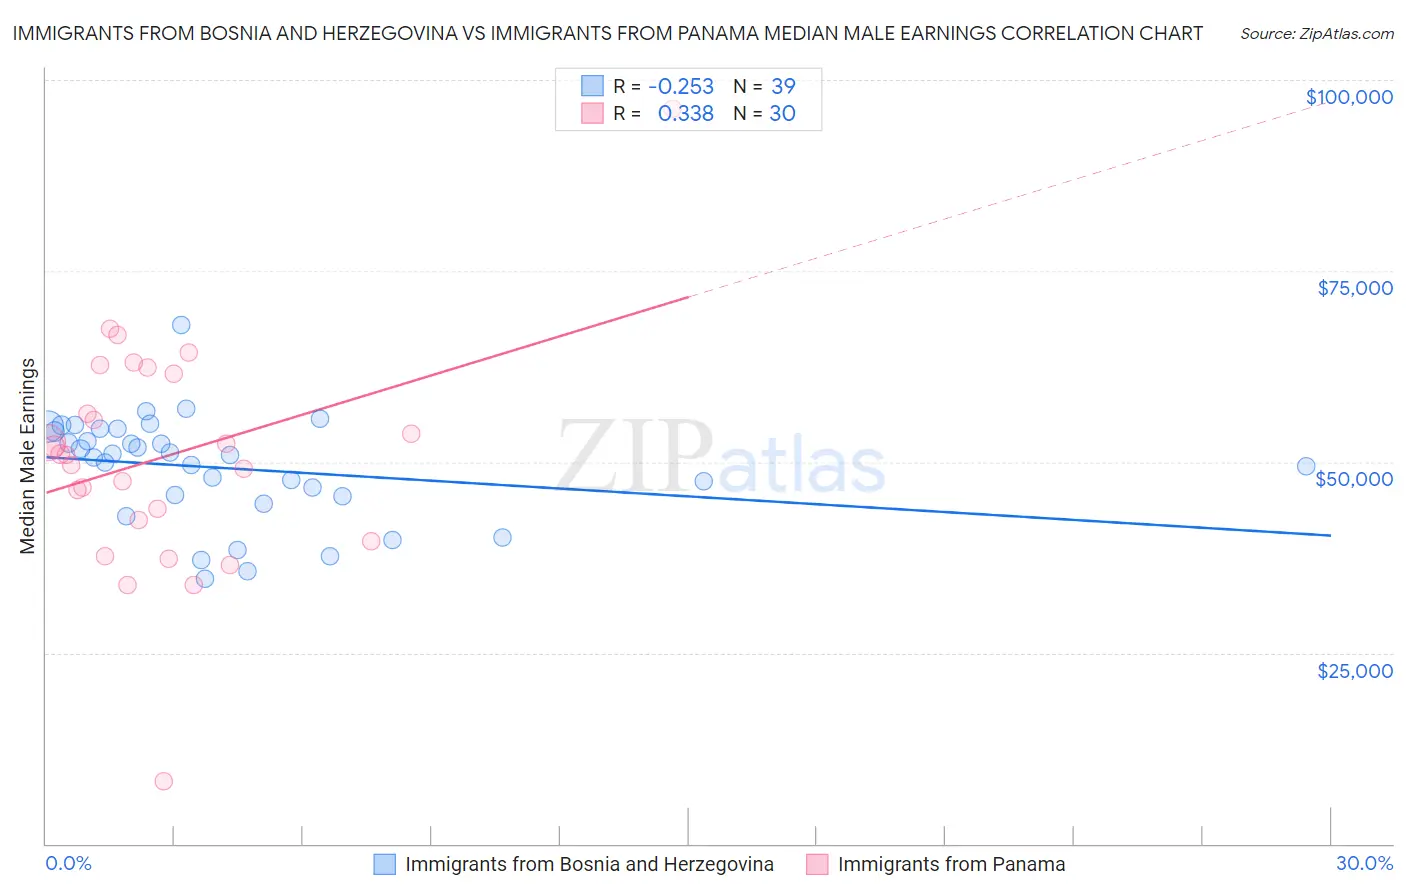 Immigrants from Bosnia and Herzegovina vs Immigrants from Panama Median Male Earnings